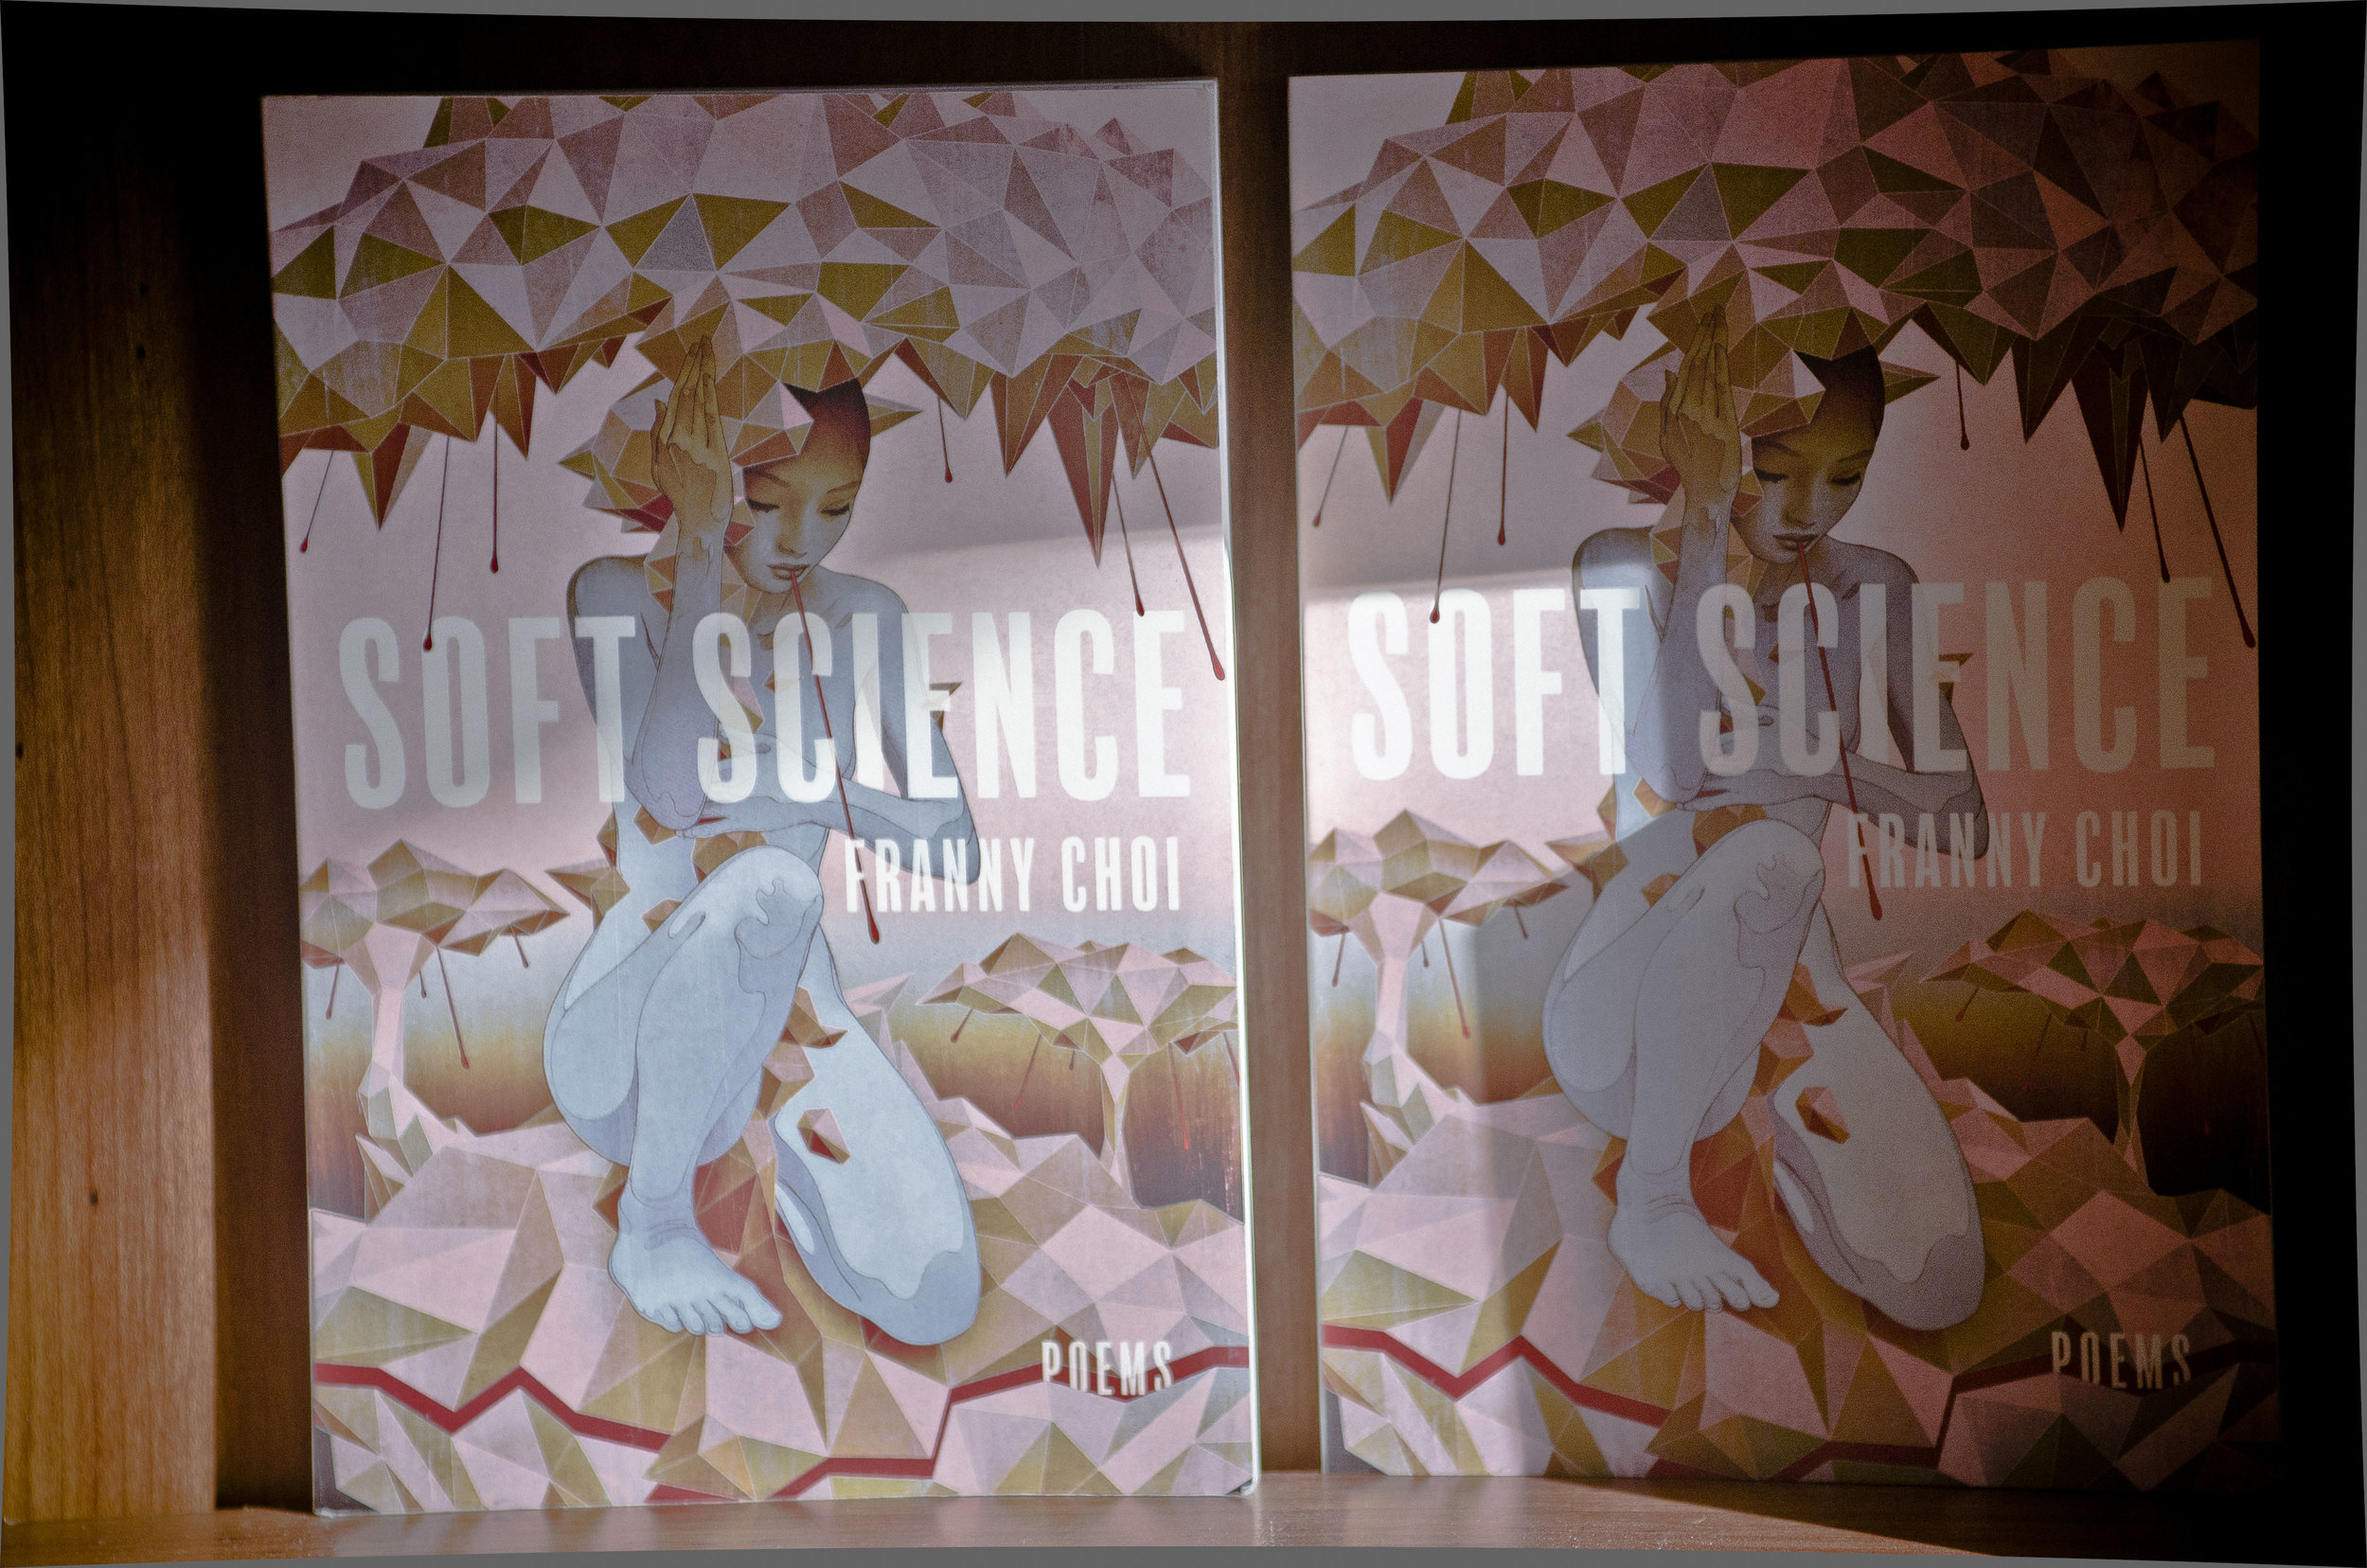 soft science by franny choi